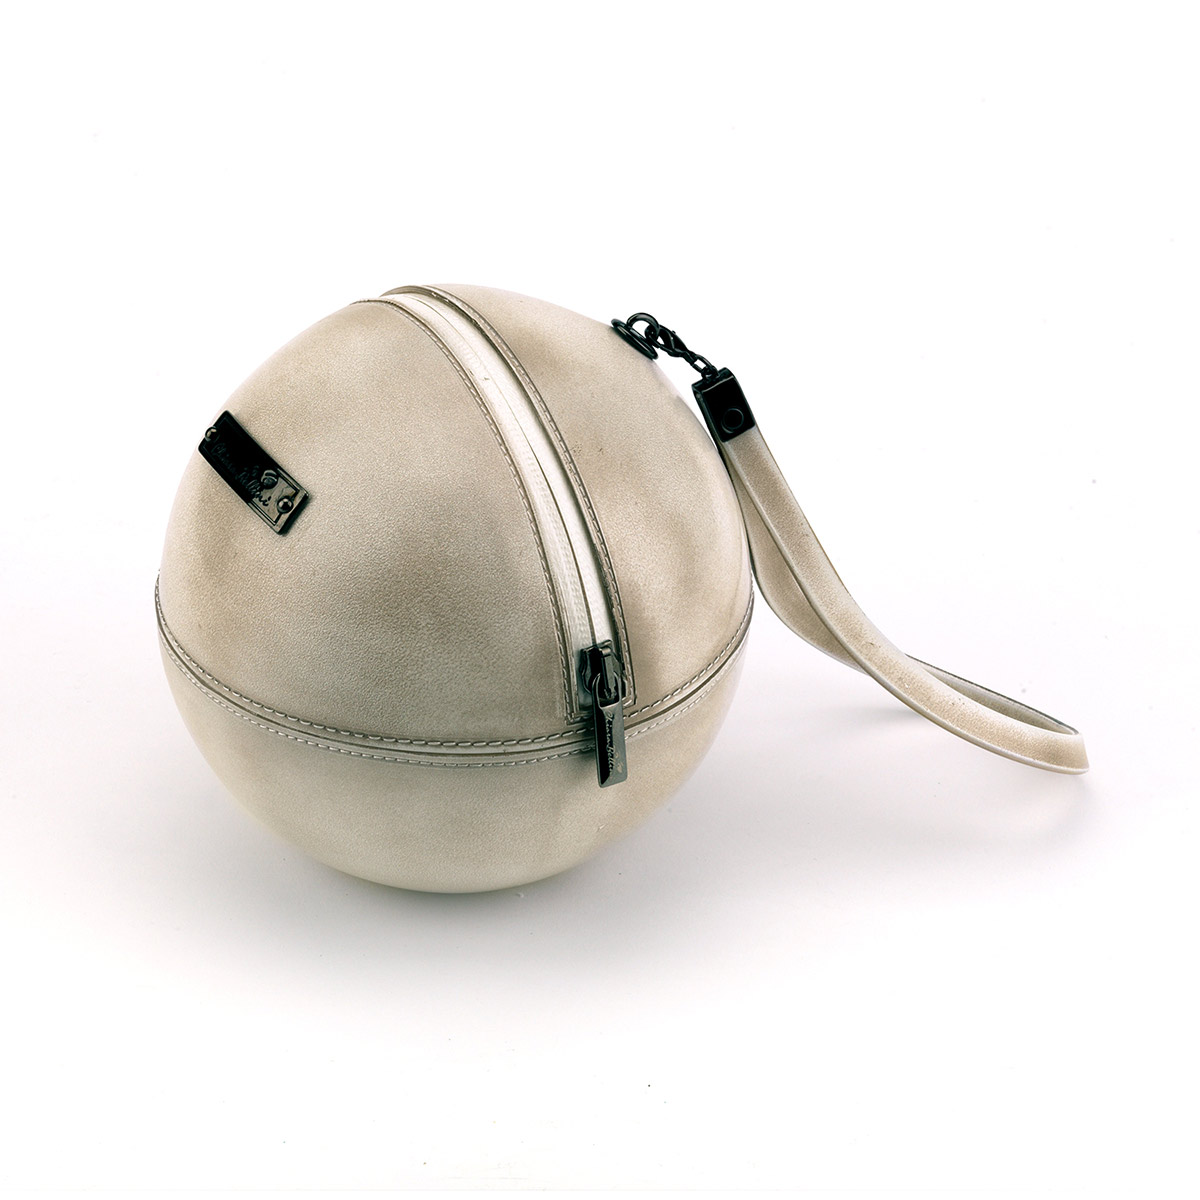 Sphere Bag in PVC with antique finish effect